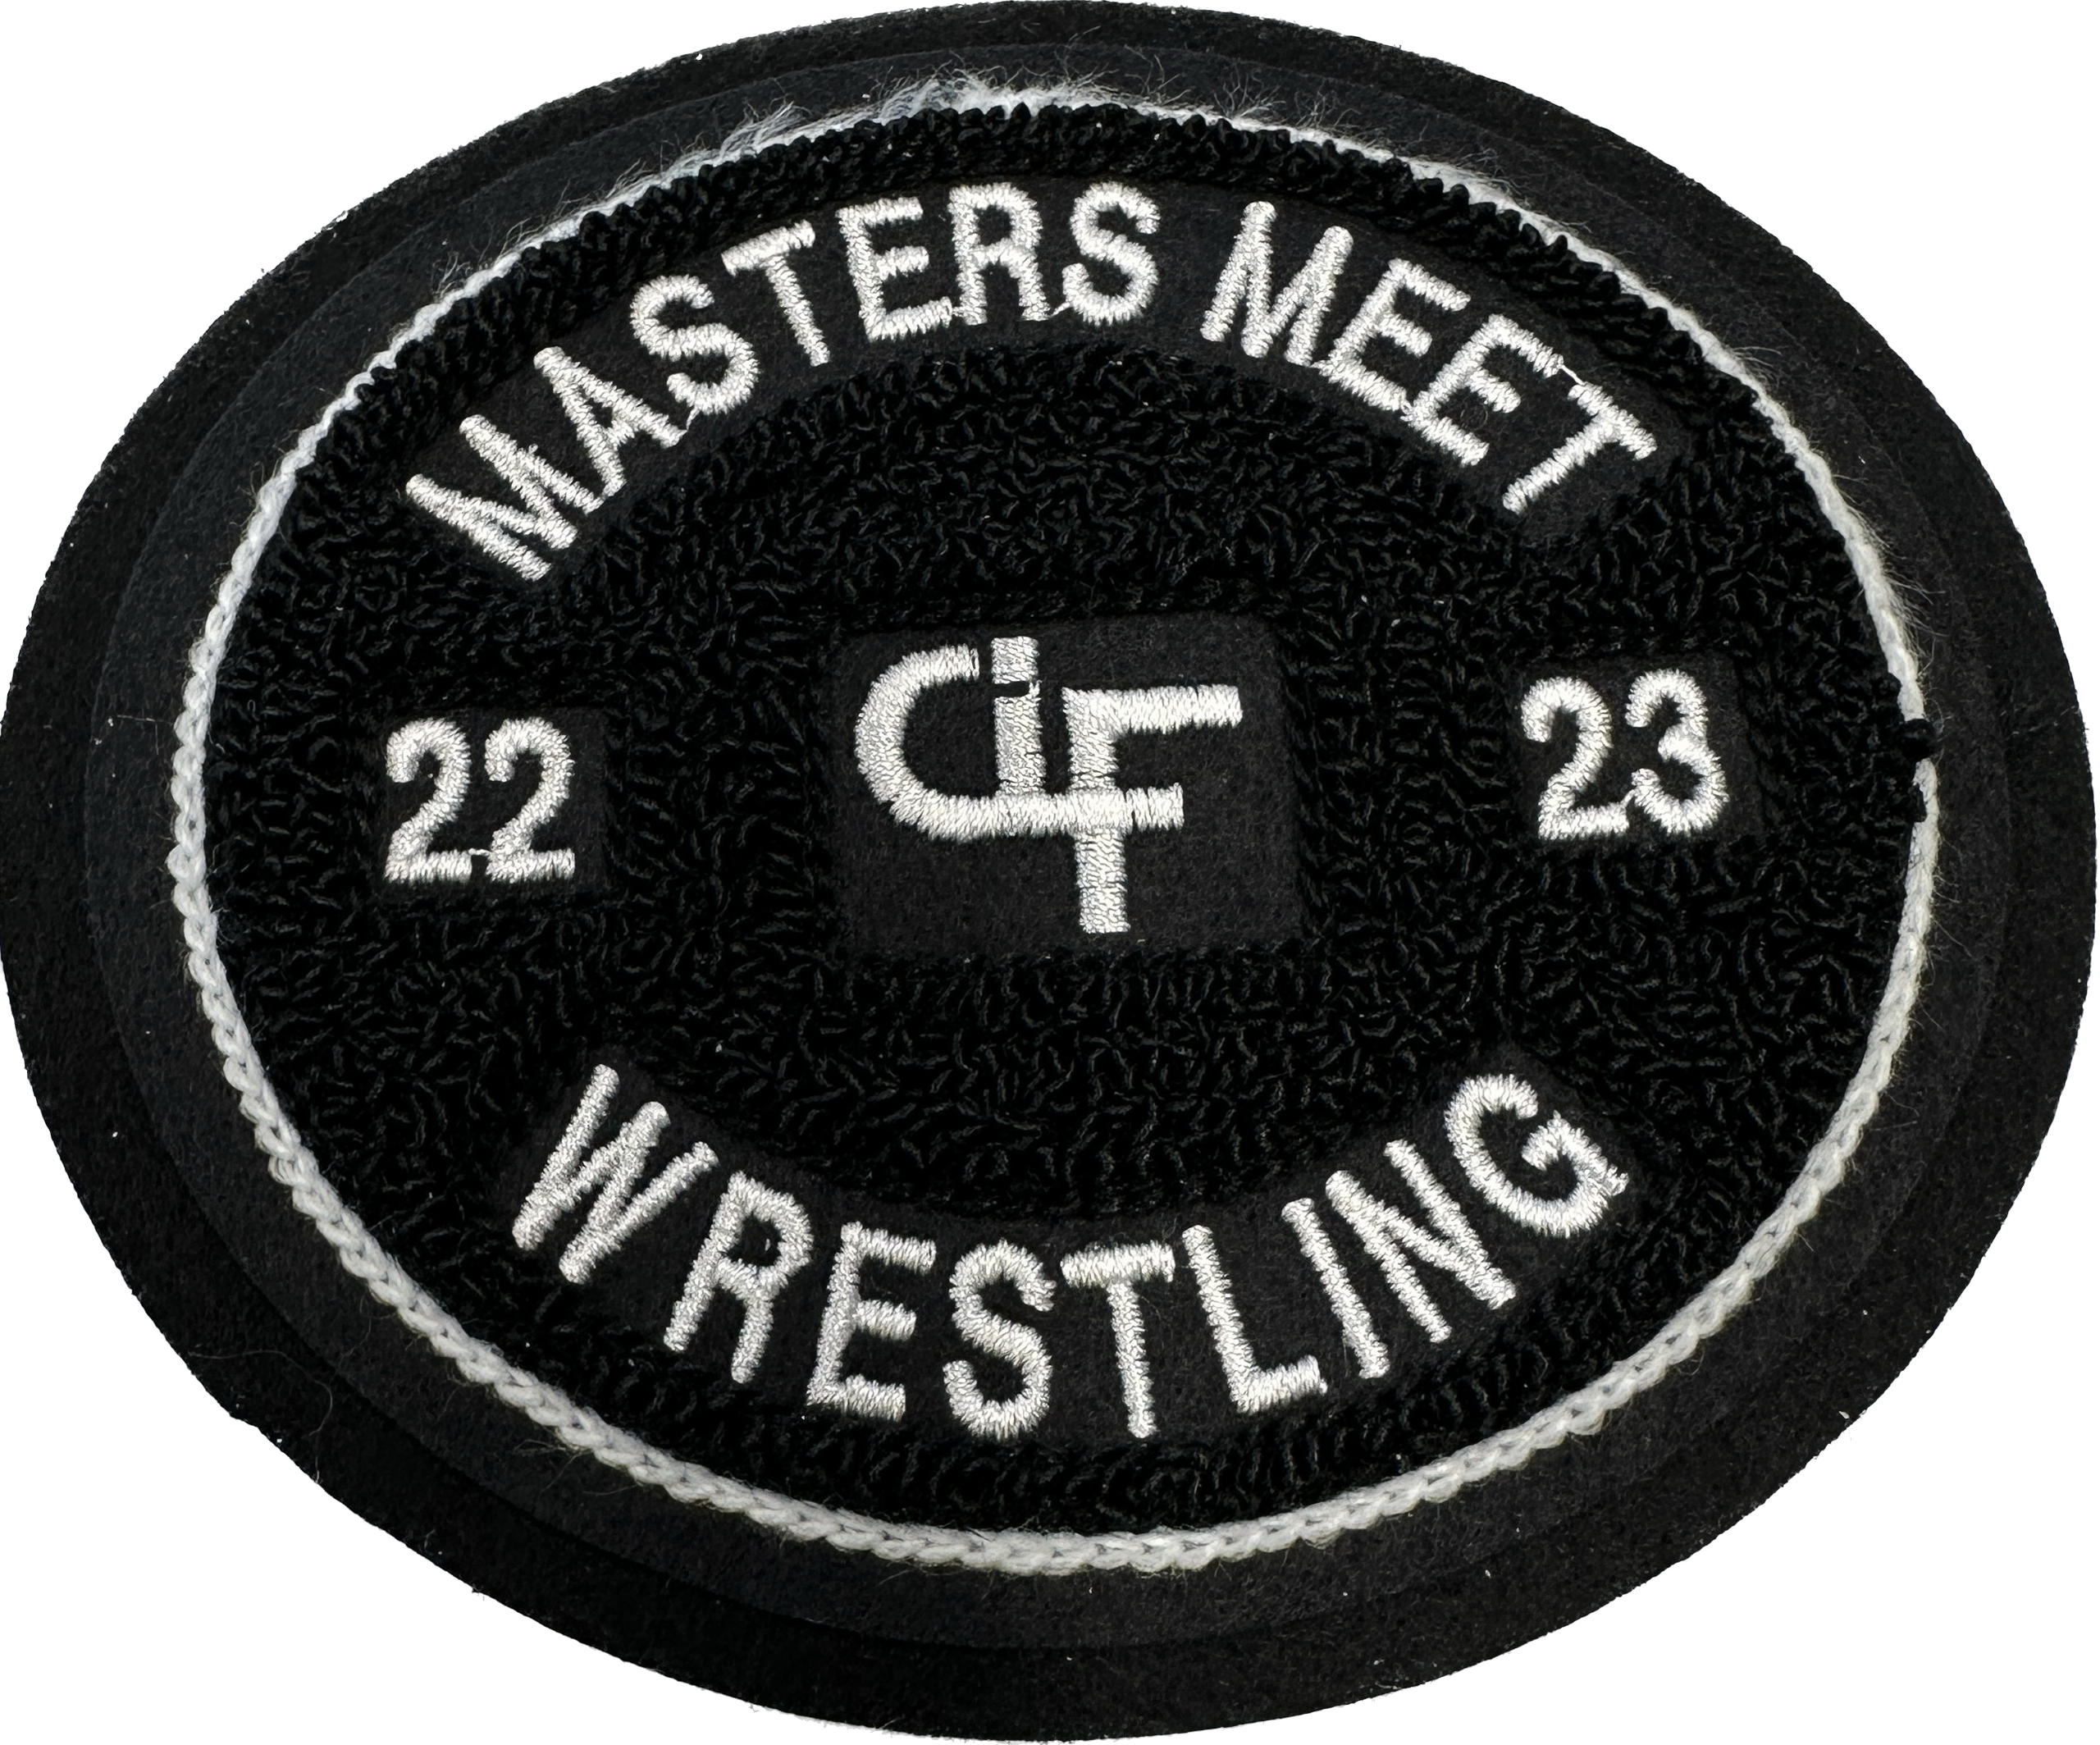 2019 Grand Masters Wrestling Patch